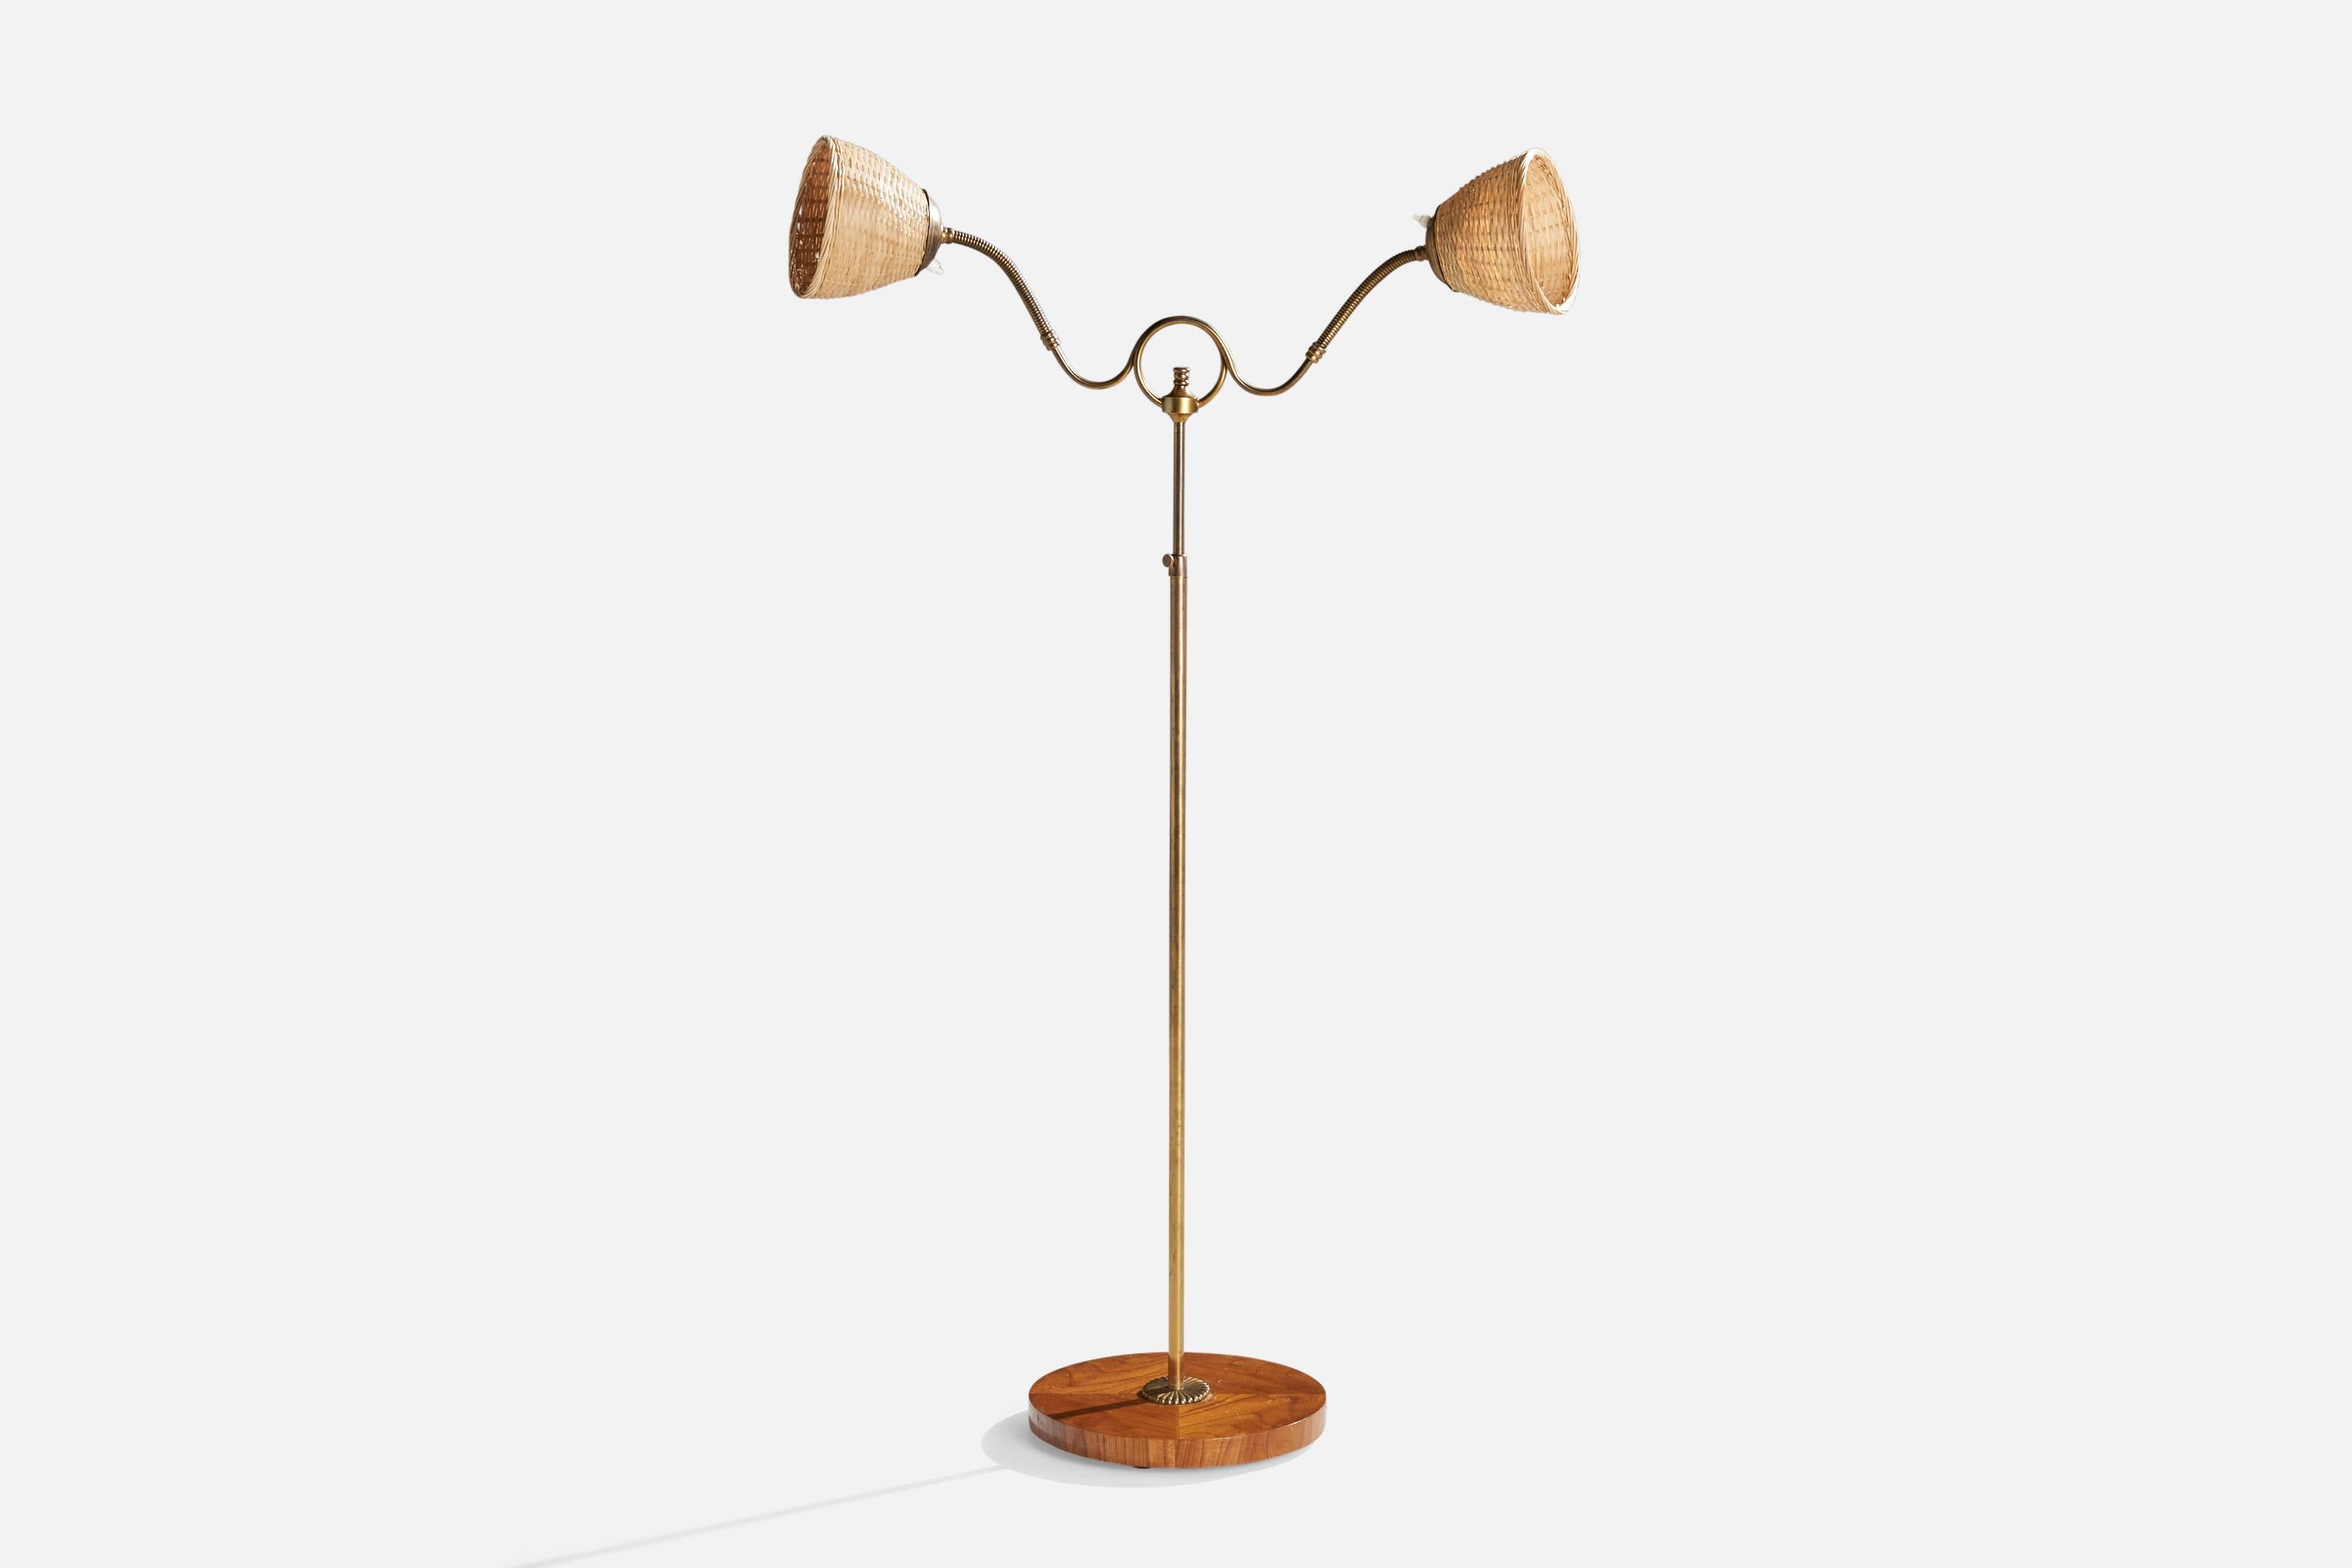 An adjustable brass, rattan and elm floor lamp designed and produced in Sweden, 1940s.

Overall Dimensions (inches): 60” H x 32” W x 9” D
Stated dimensions include shade.
Bulb Specifications: E-26 Bulb
Number of Sockets: 2
All lighting will be